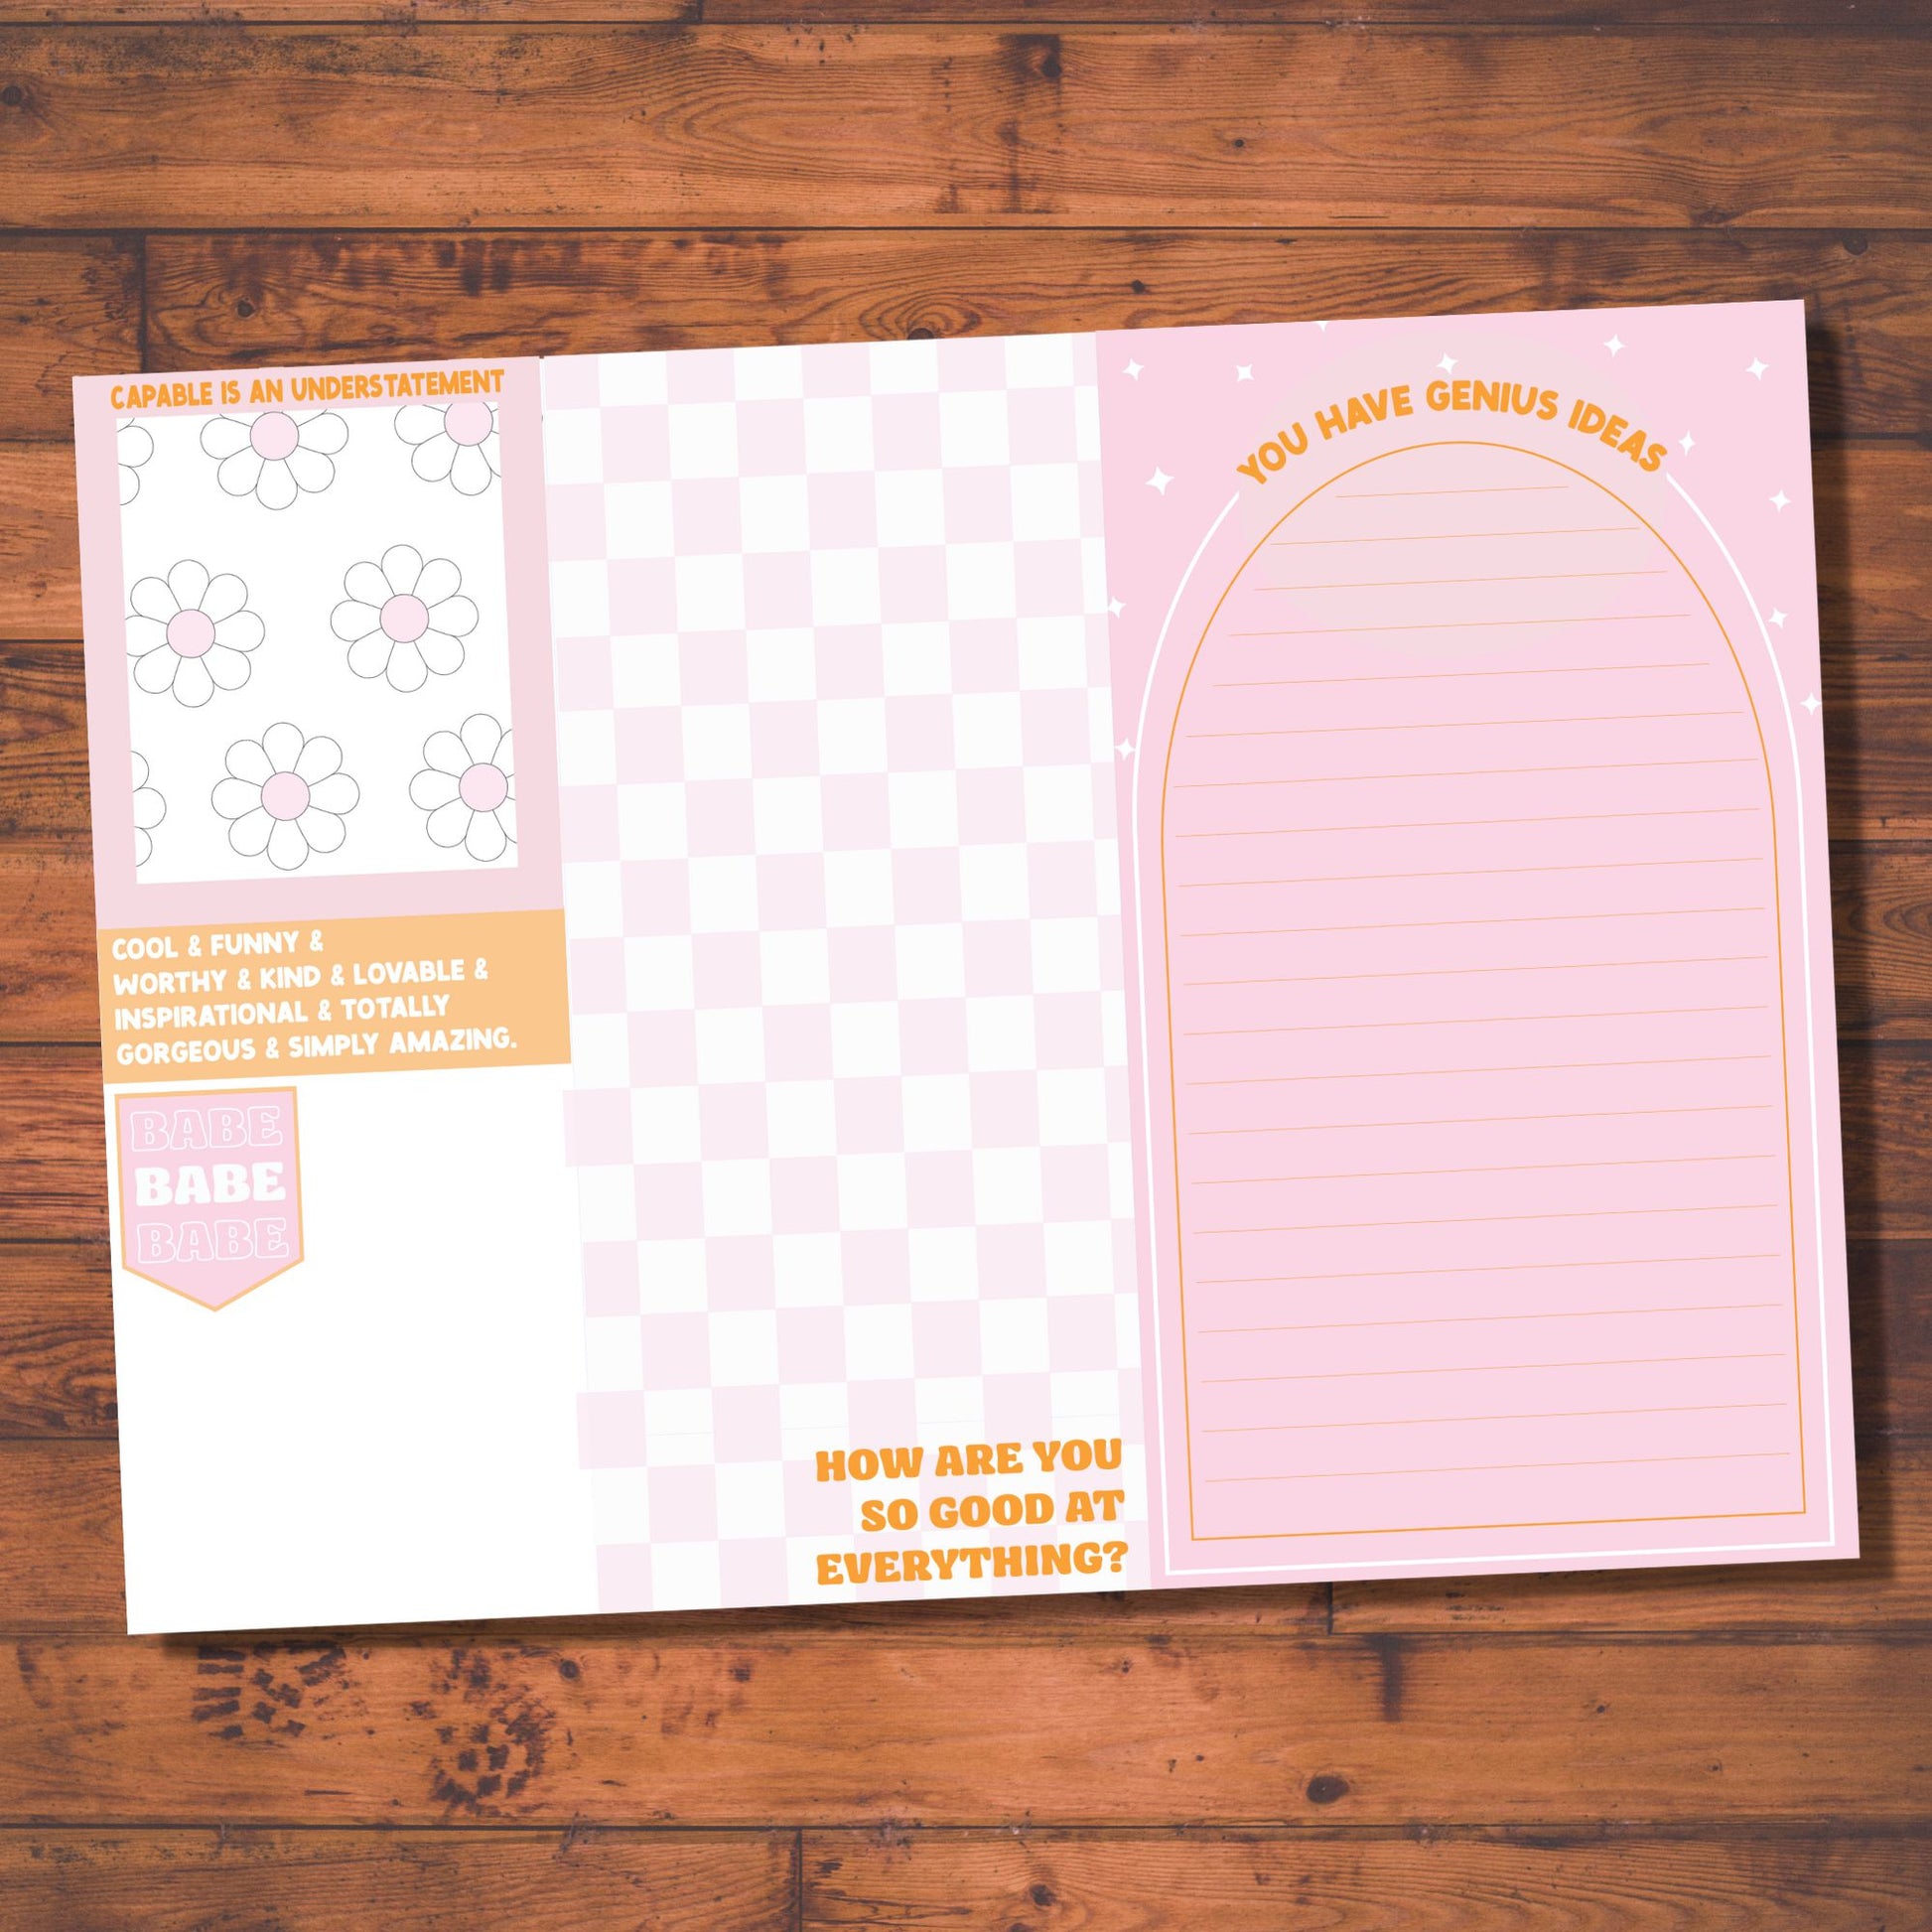 Complimentary Notepad Set | 5 Notepads in One Giftable Set